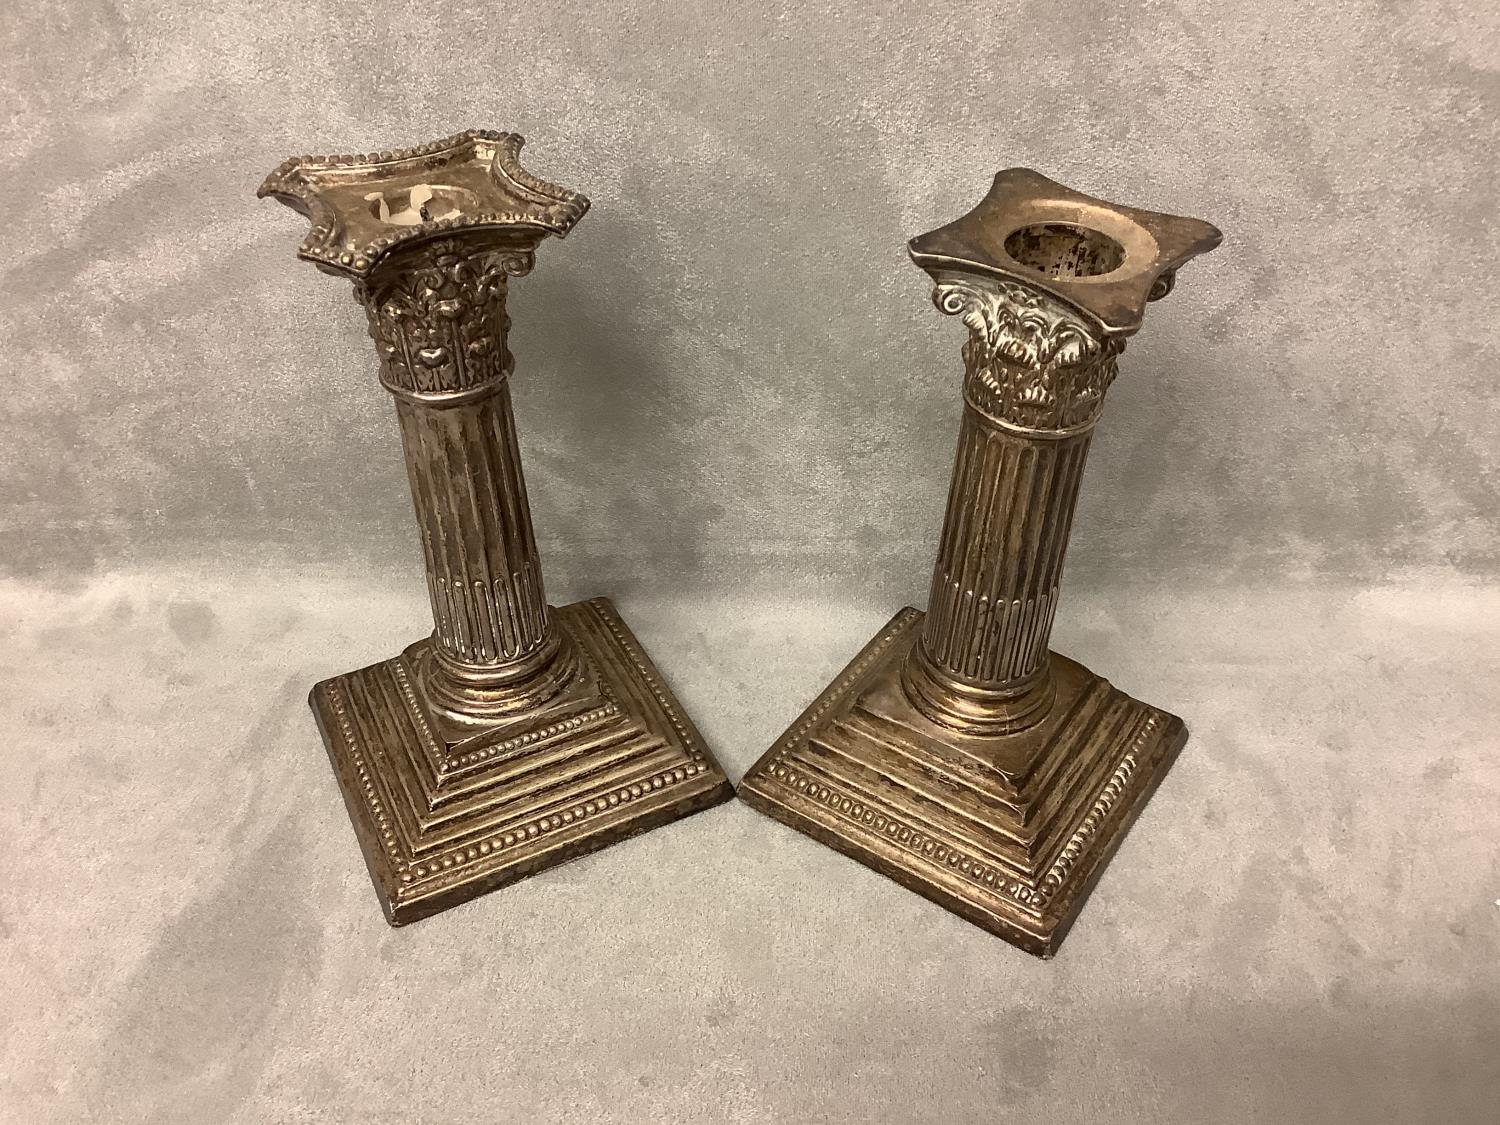 Two similar hallmarked silver weighted column candlesticks 15 cm H Condition tarnished and damage, - Image 2 of 3